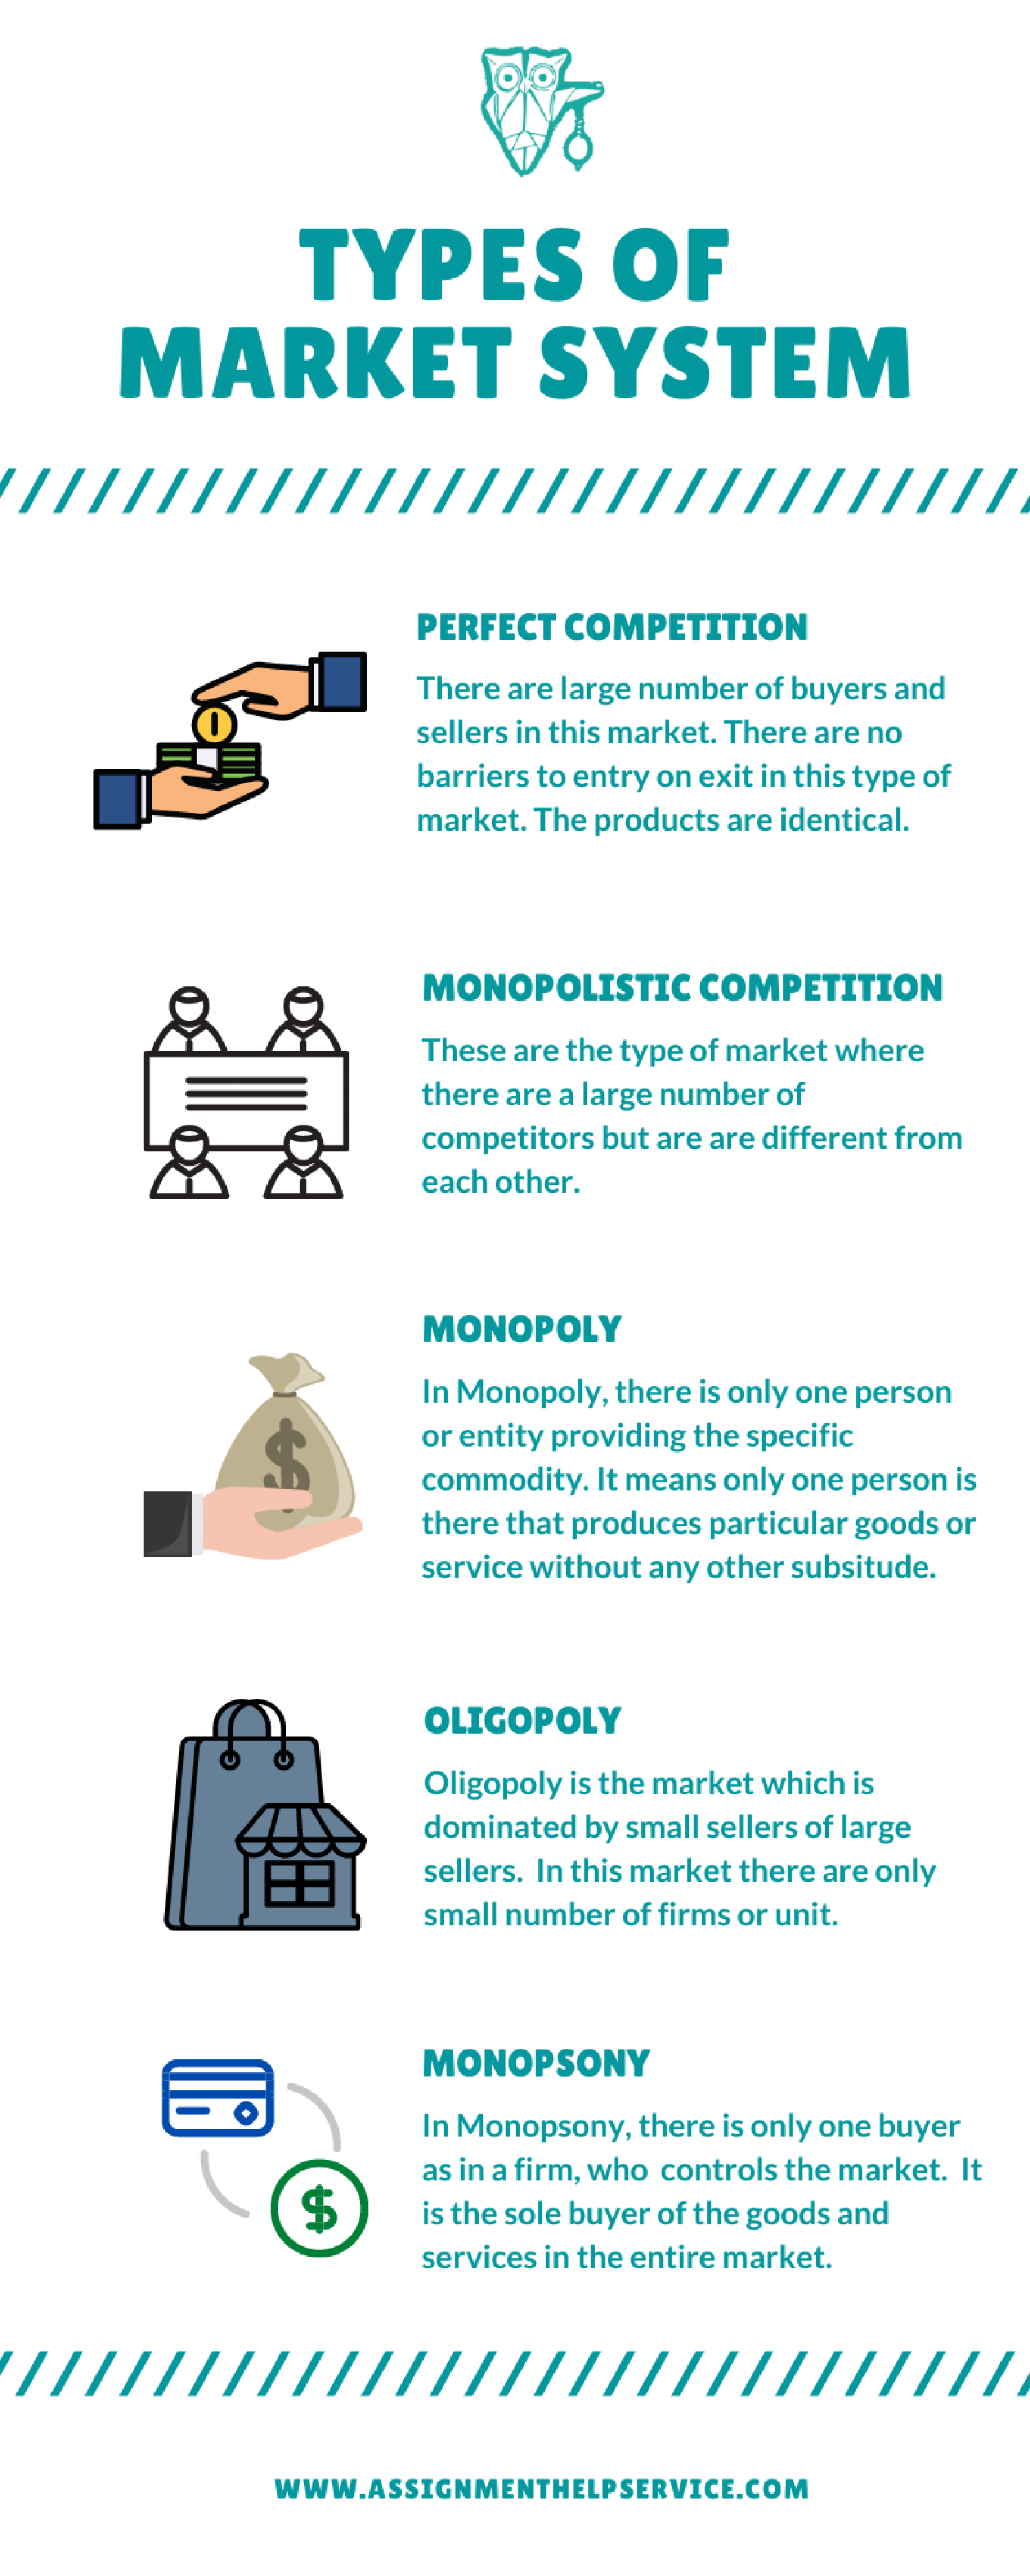 Types OF Market System Infographic